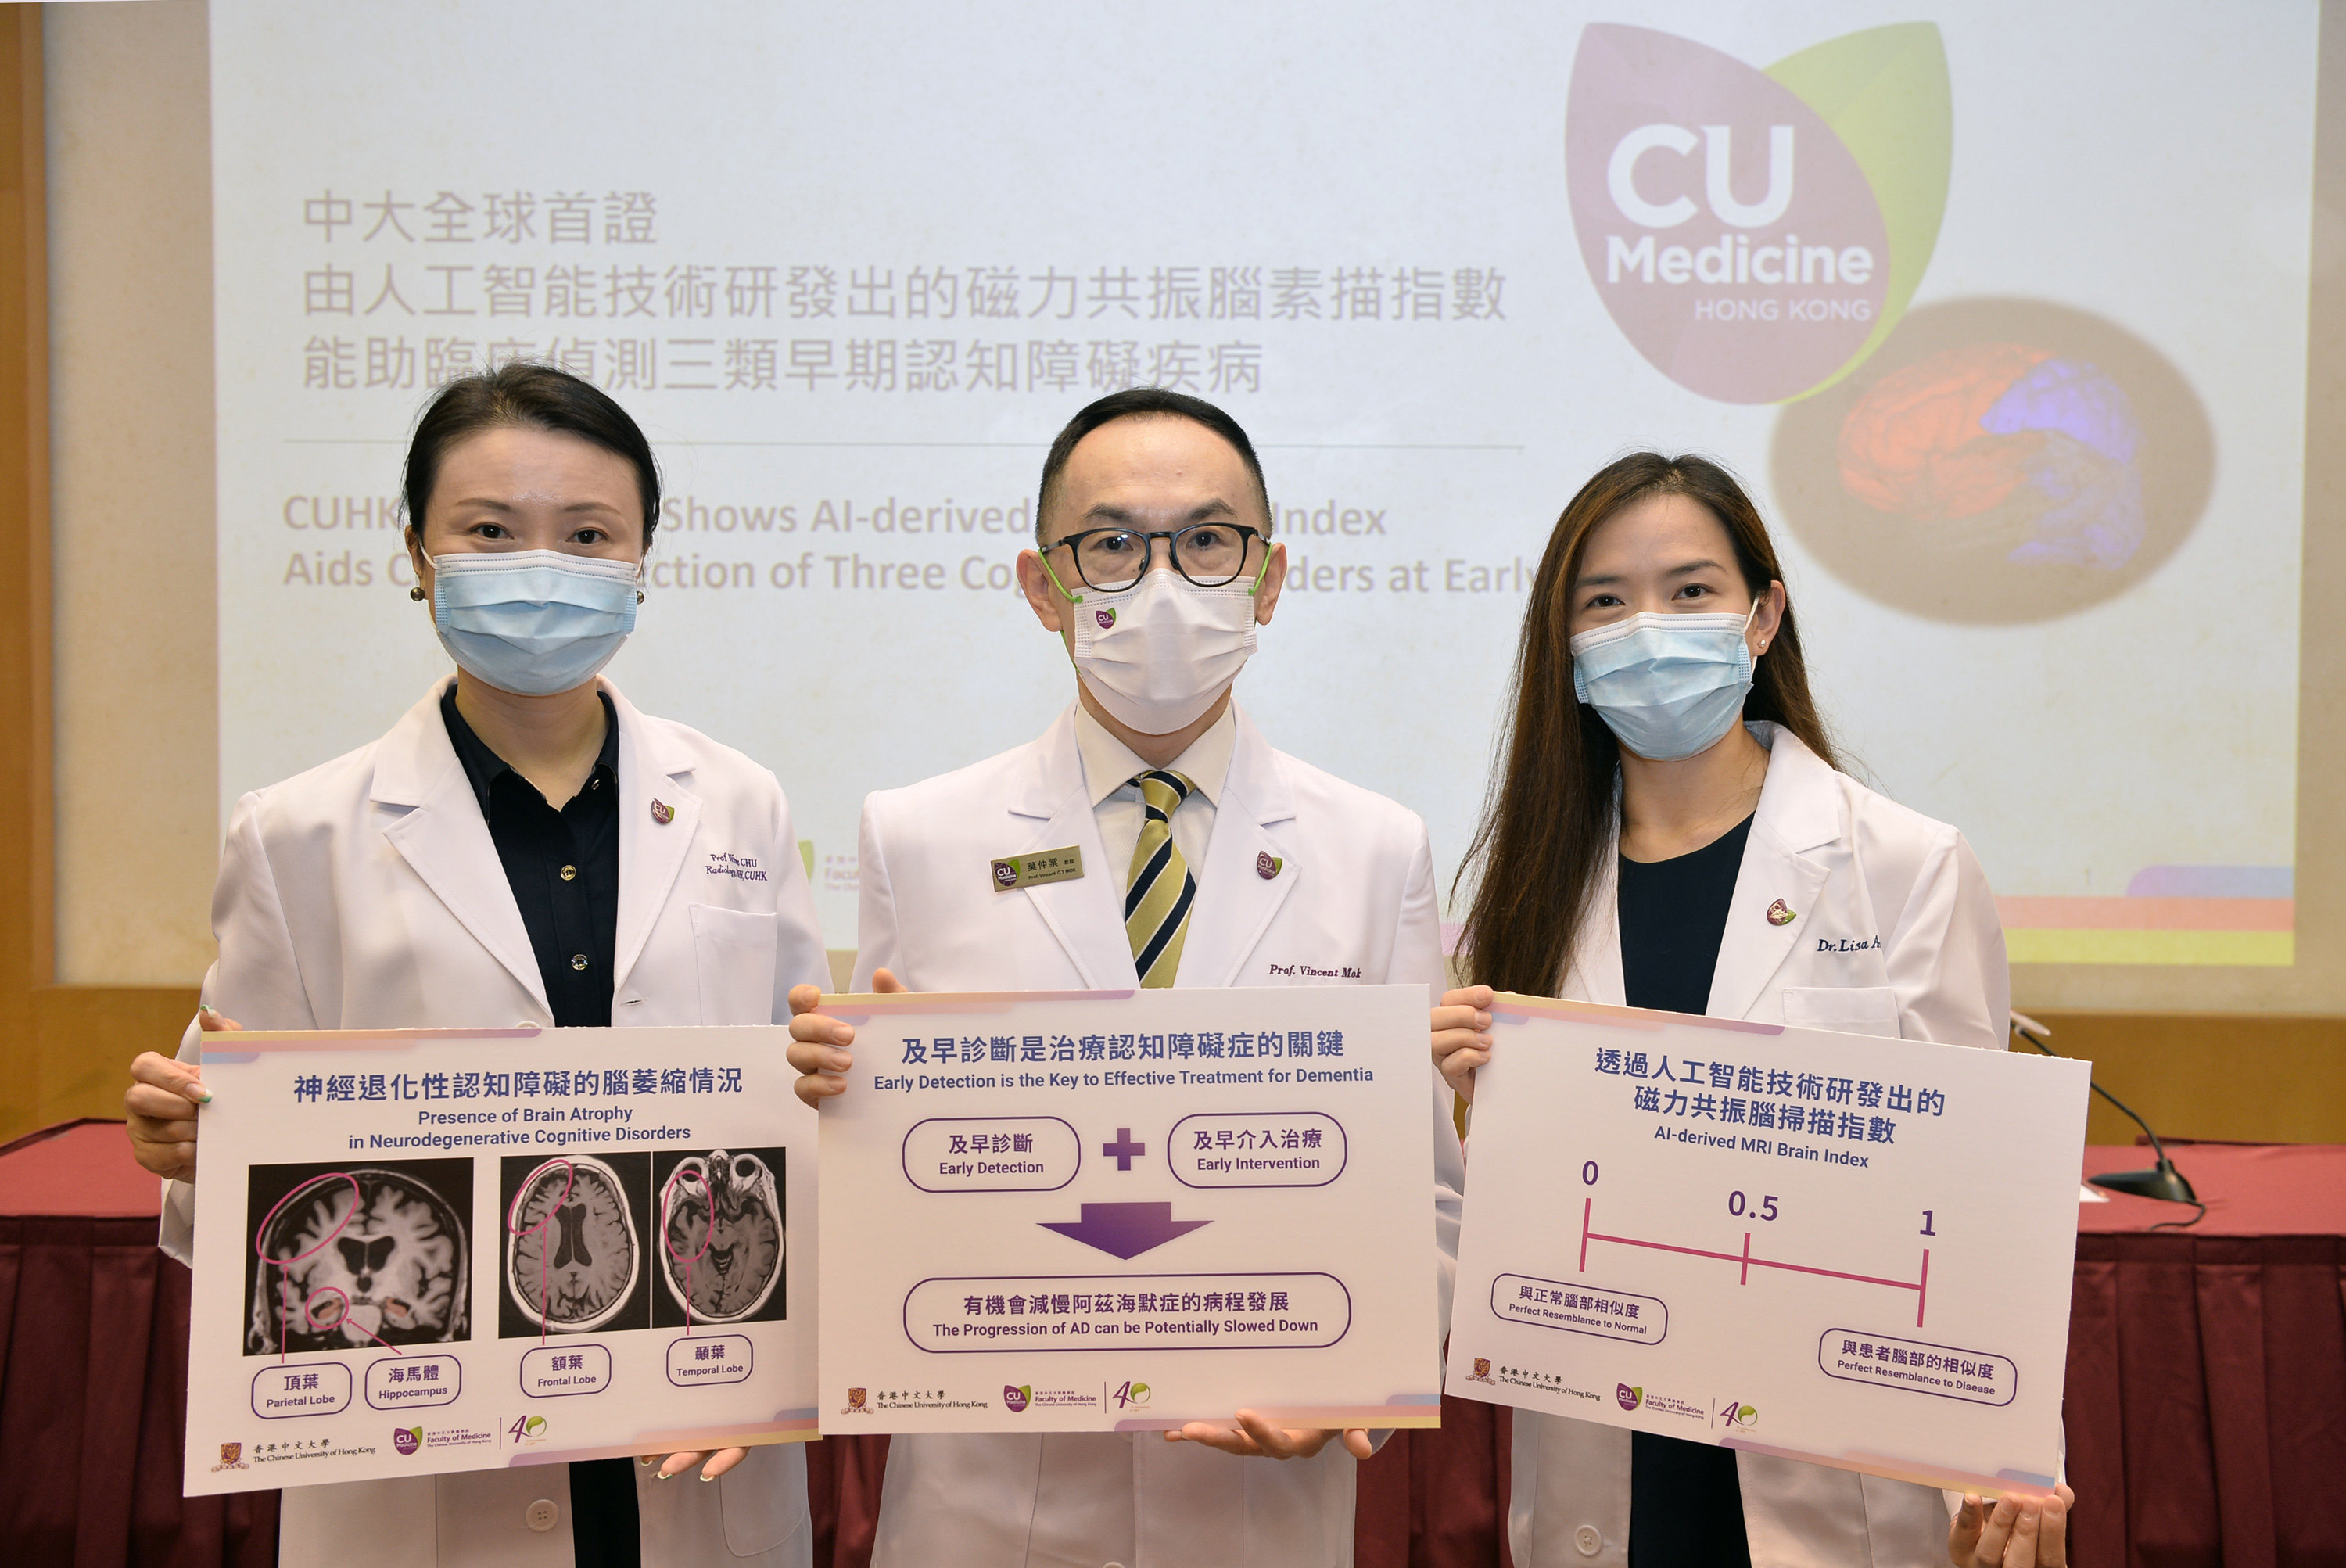 A series of researches recently done by CU Medicine has validated the use of AI-derived MRI brain indices for the detection of early-stage cognitive disorders. 